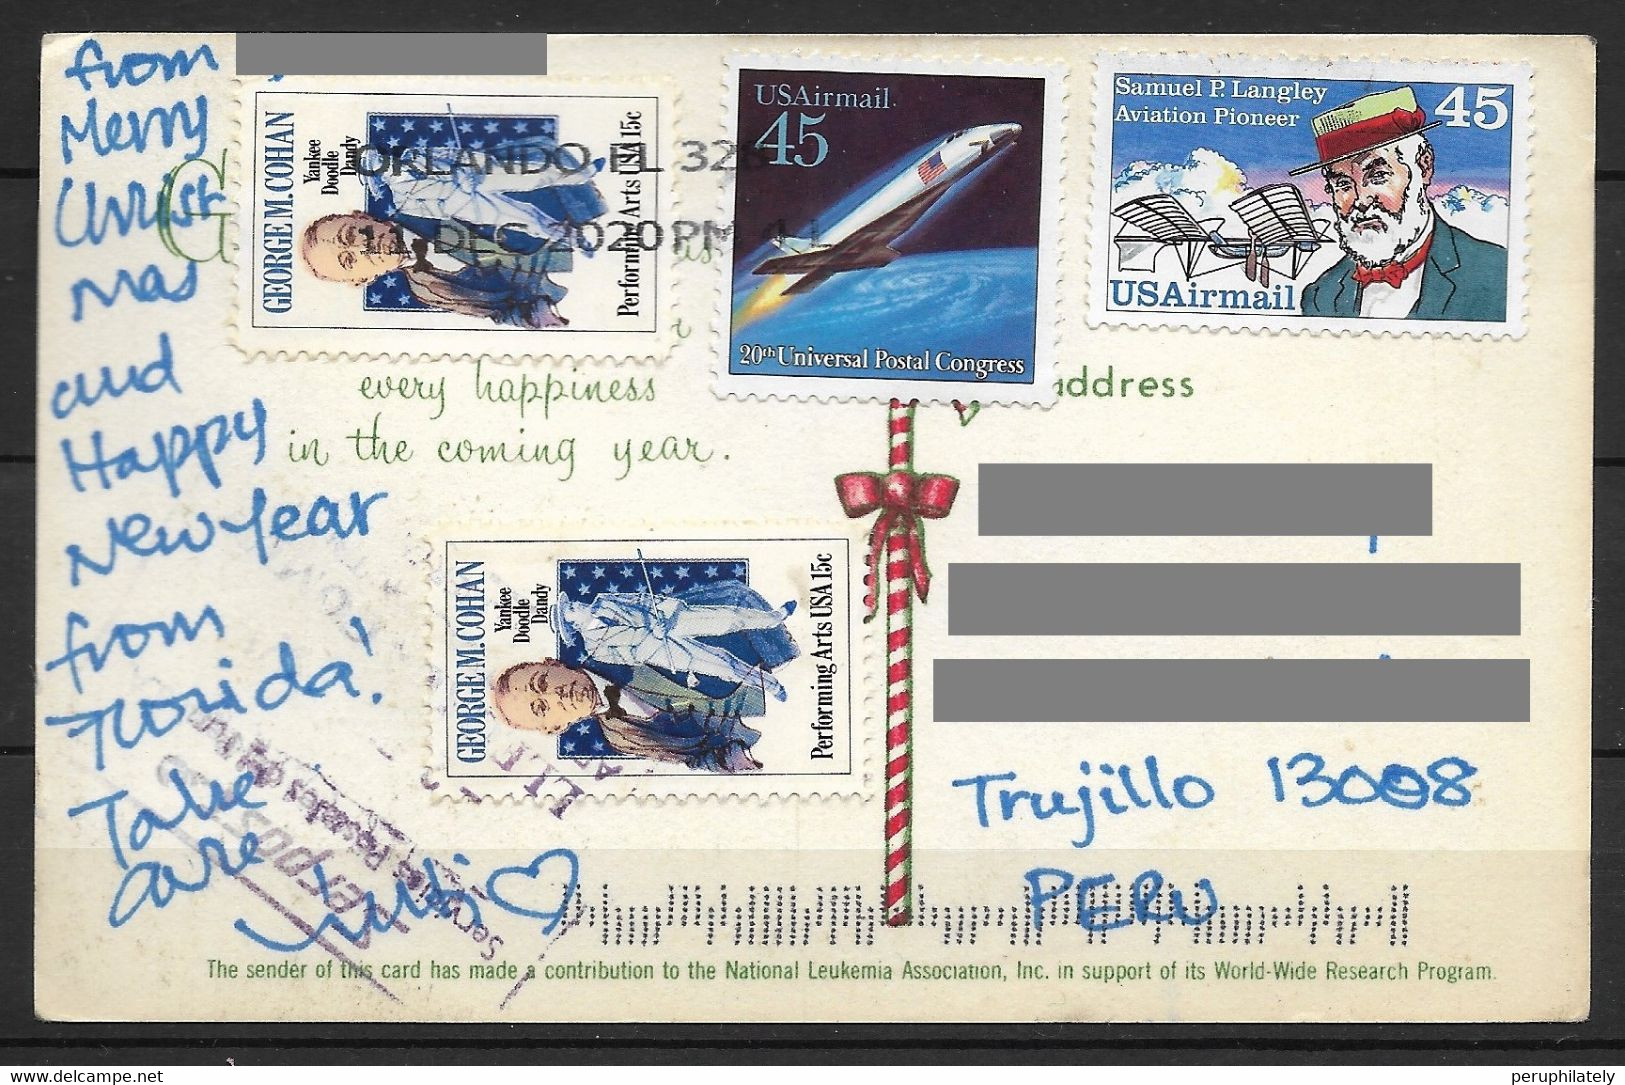 USA POSTCARD WITH AVIATION , SPACE SHUTTLE &  MOVIE STAMPS SENT TO PERU - Recordatorios